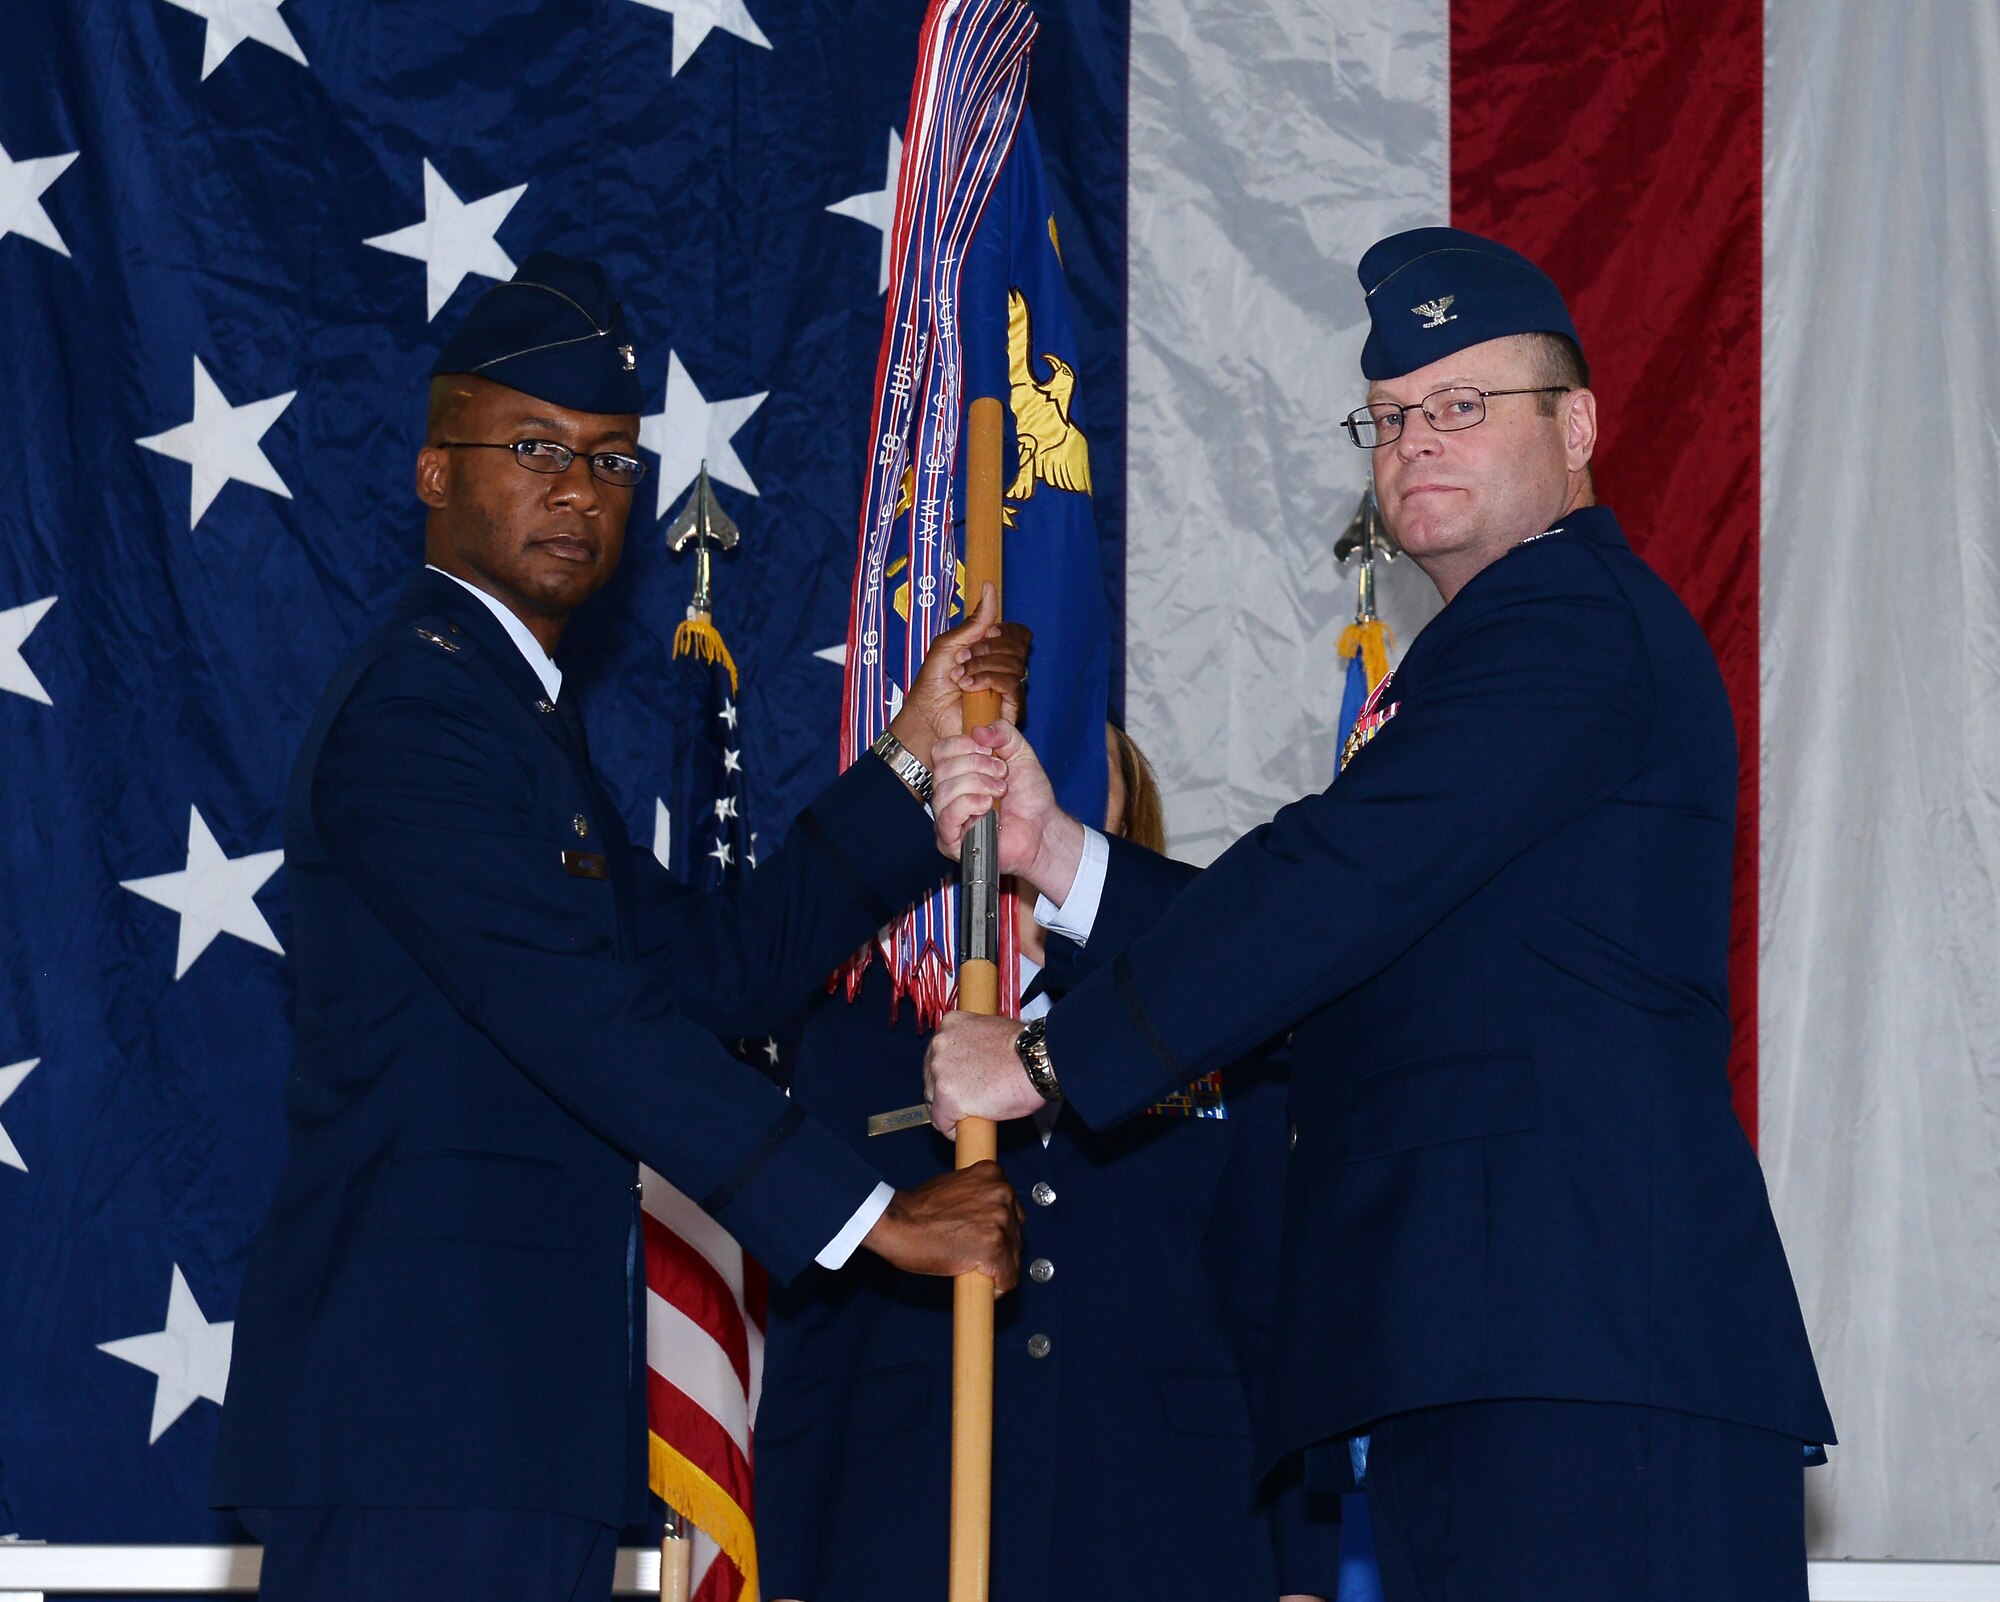 Col. Gavin Marks, 55th Wing commander, receives the 55th Mission Support Group guidon from Col. J. David Norton, during the 55th Mission Support Group Change of Command ceremony July 24, 2019, inside the Offutt Air Force Base Fire Station. Col. W.R. Alan Dayton took over command of the 55th MSG from Col. J. David Norton who has served in the position since 2017.